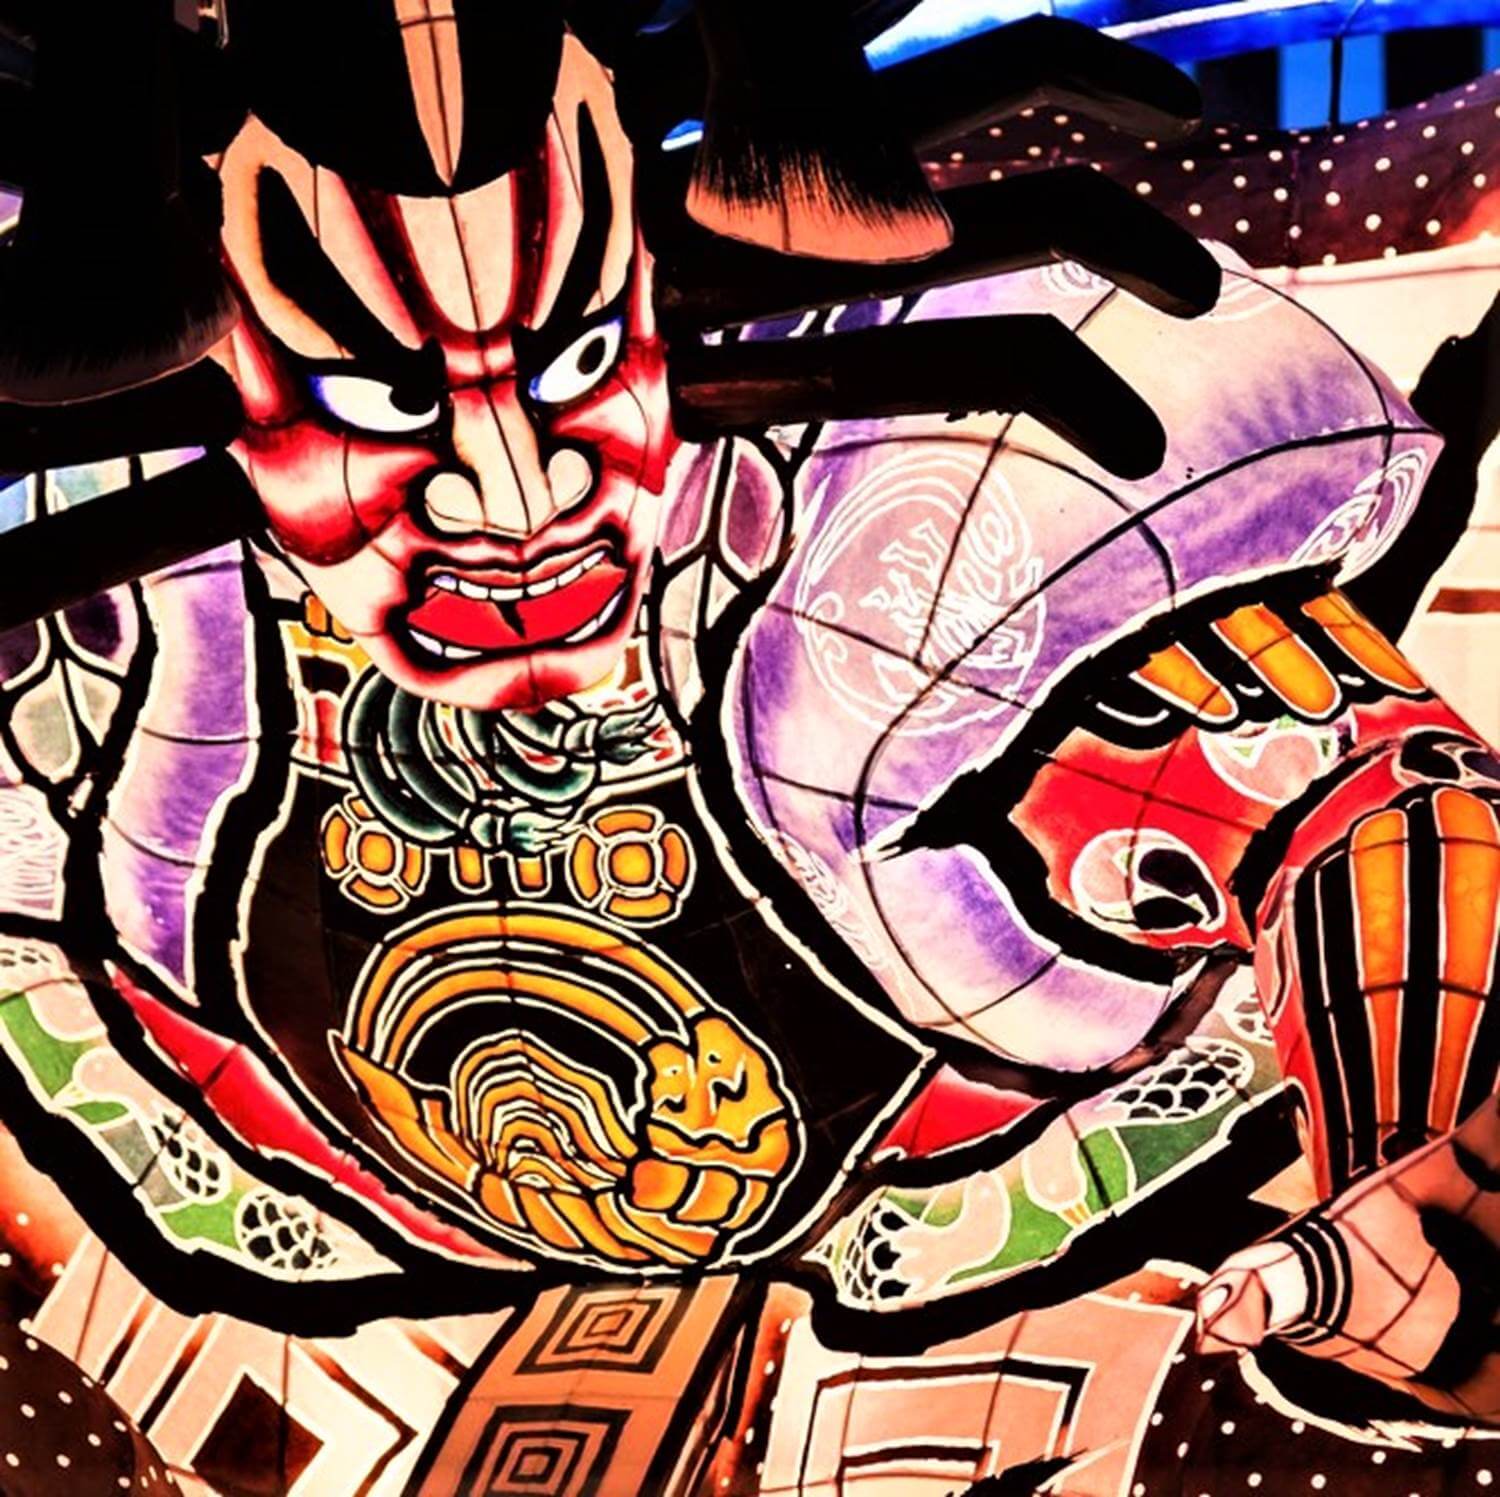 In Aomori City, a parade to pull huge lantern floats called "Nebuta" is held = Shutterstock